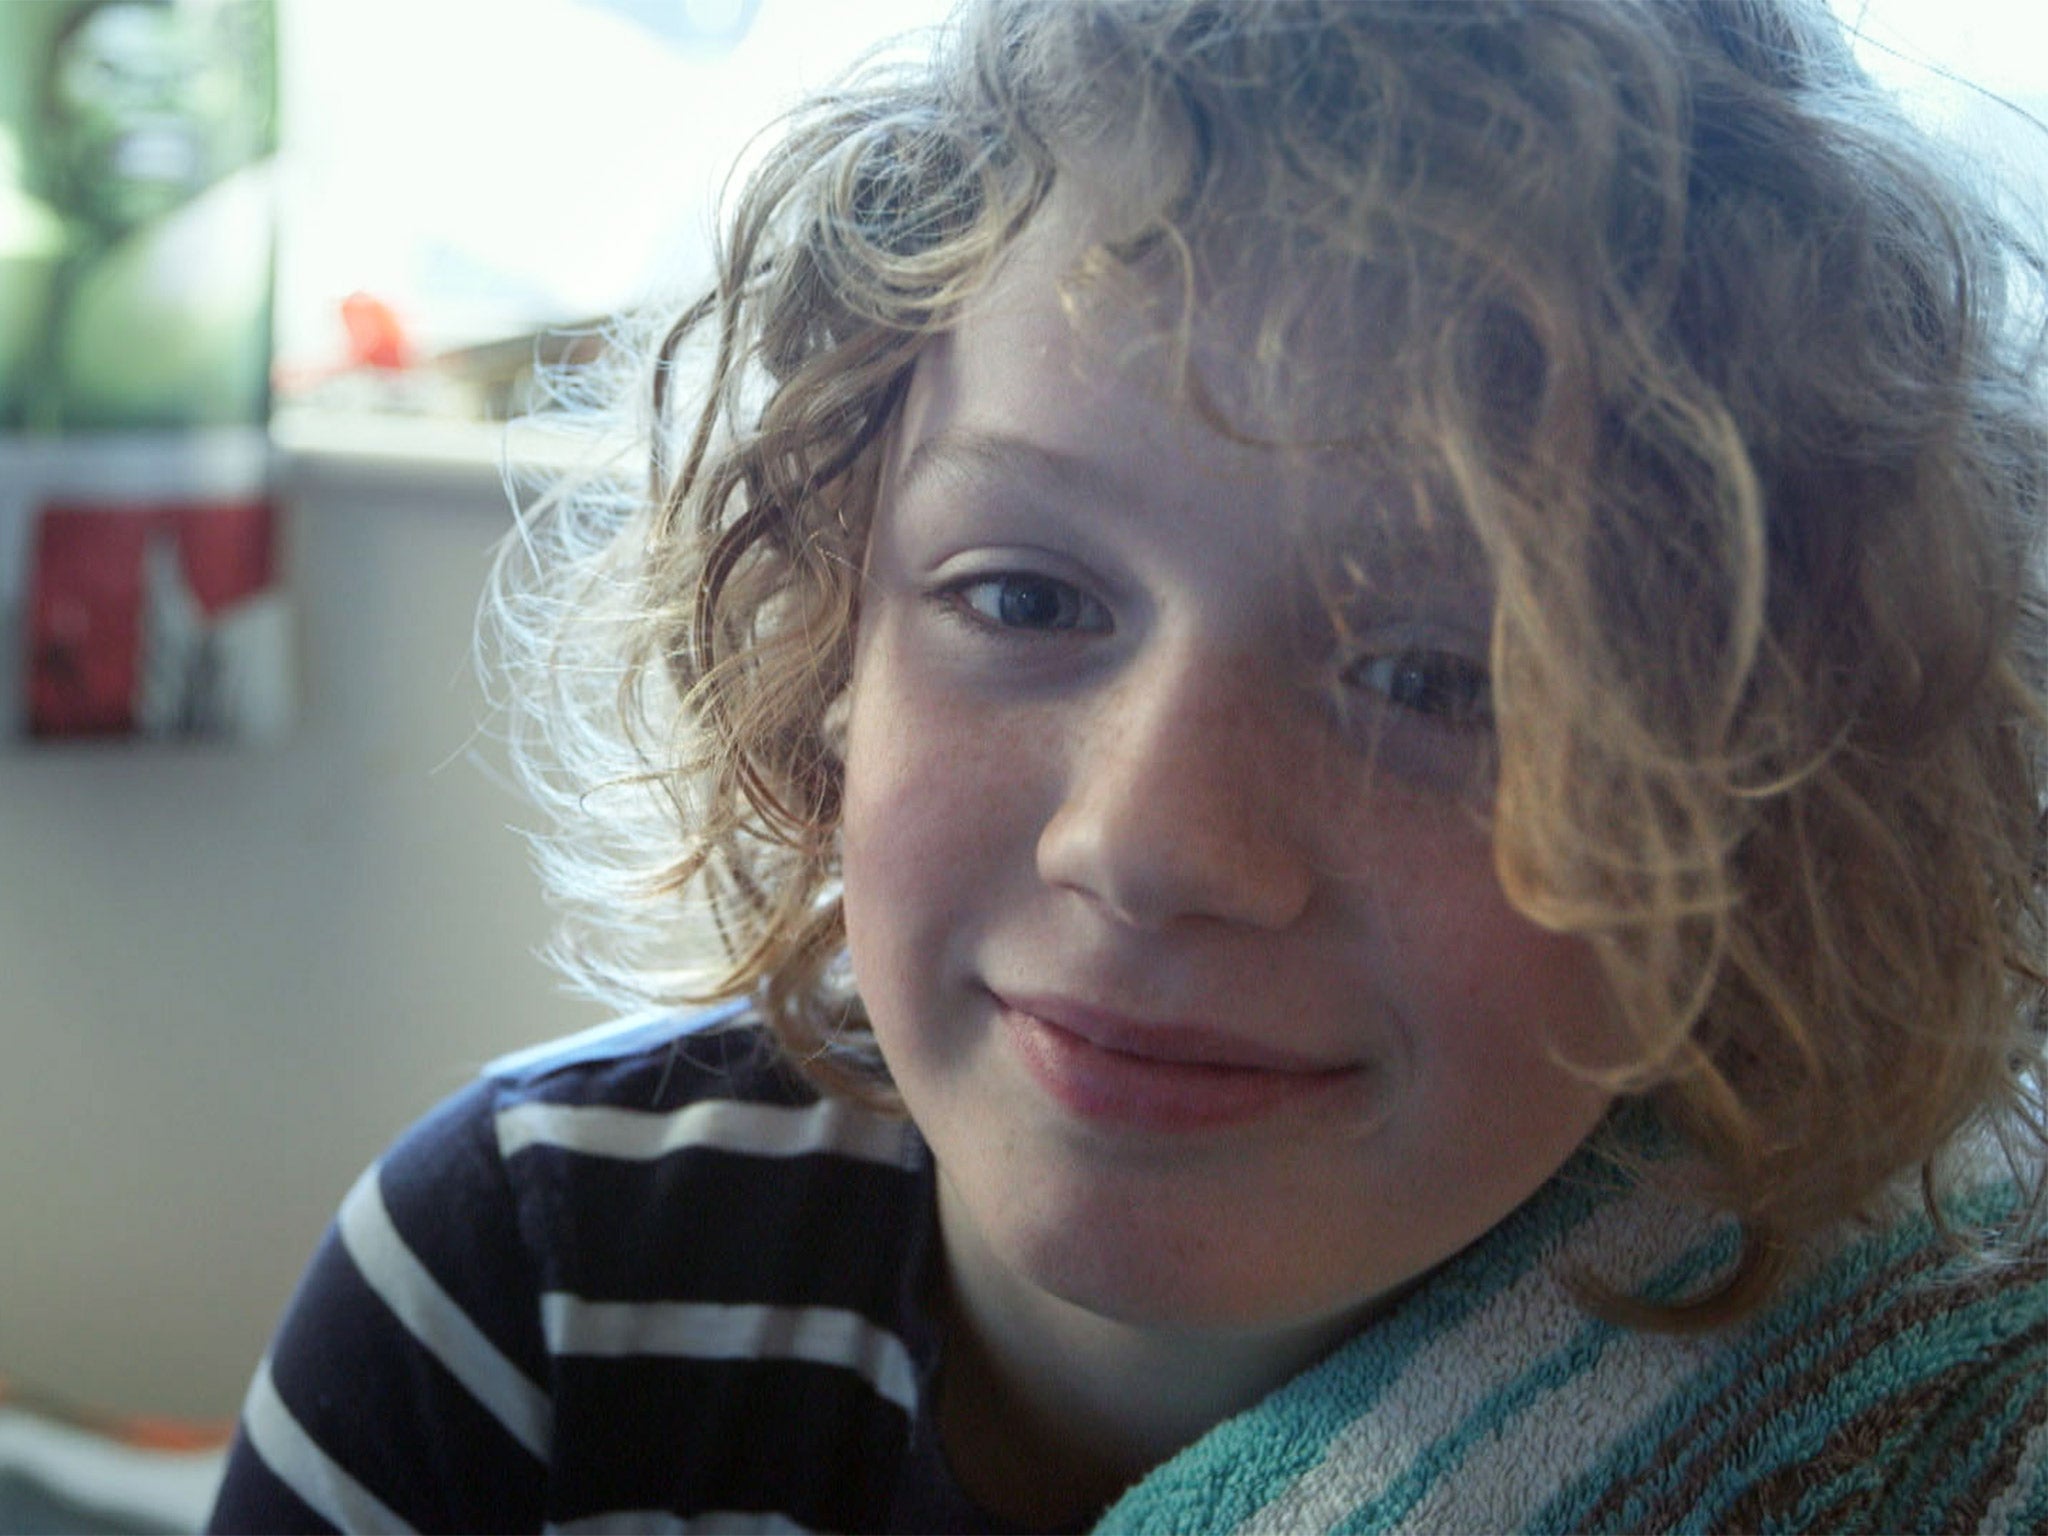 Innocent victim: Oli, a 13-year-old from Cornwall, featured in ‘Kids in Crisis?’